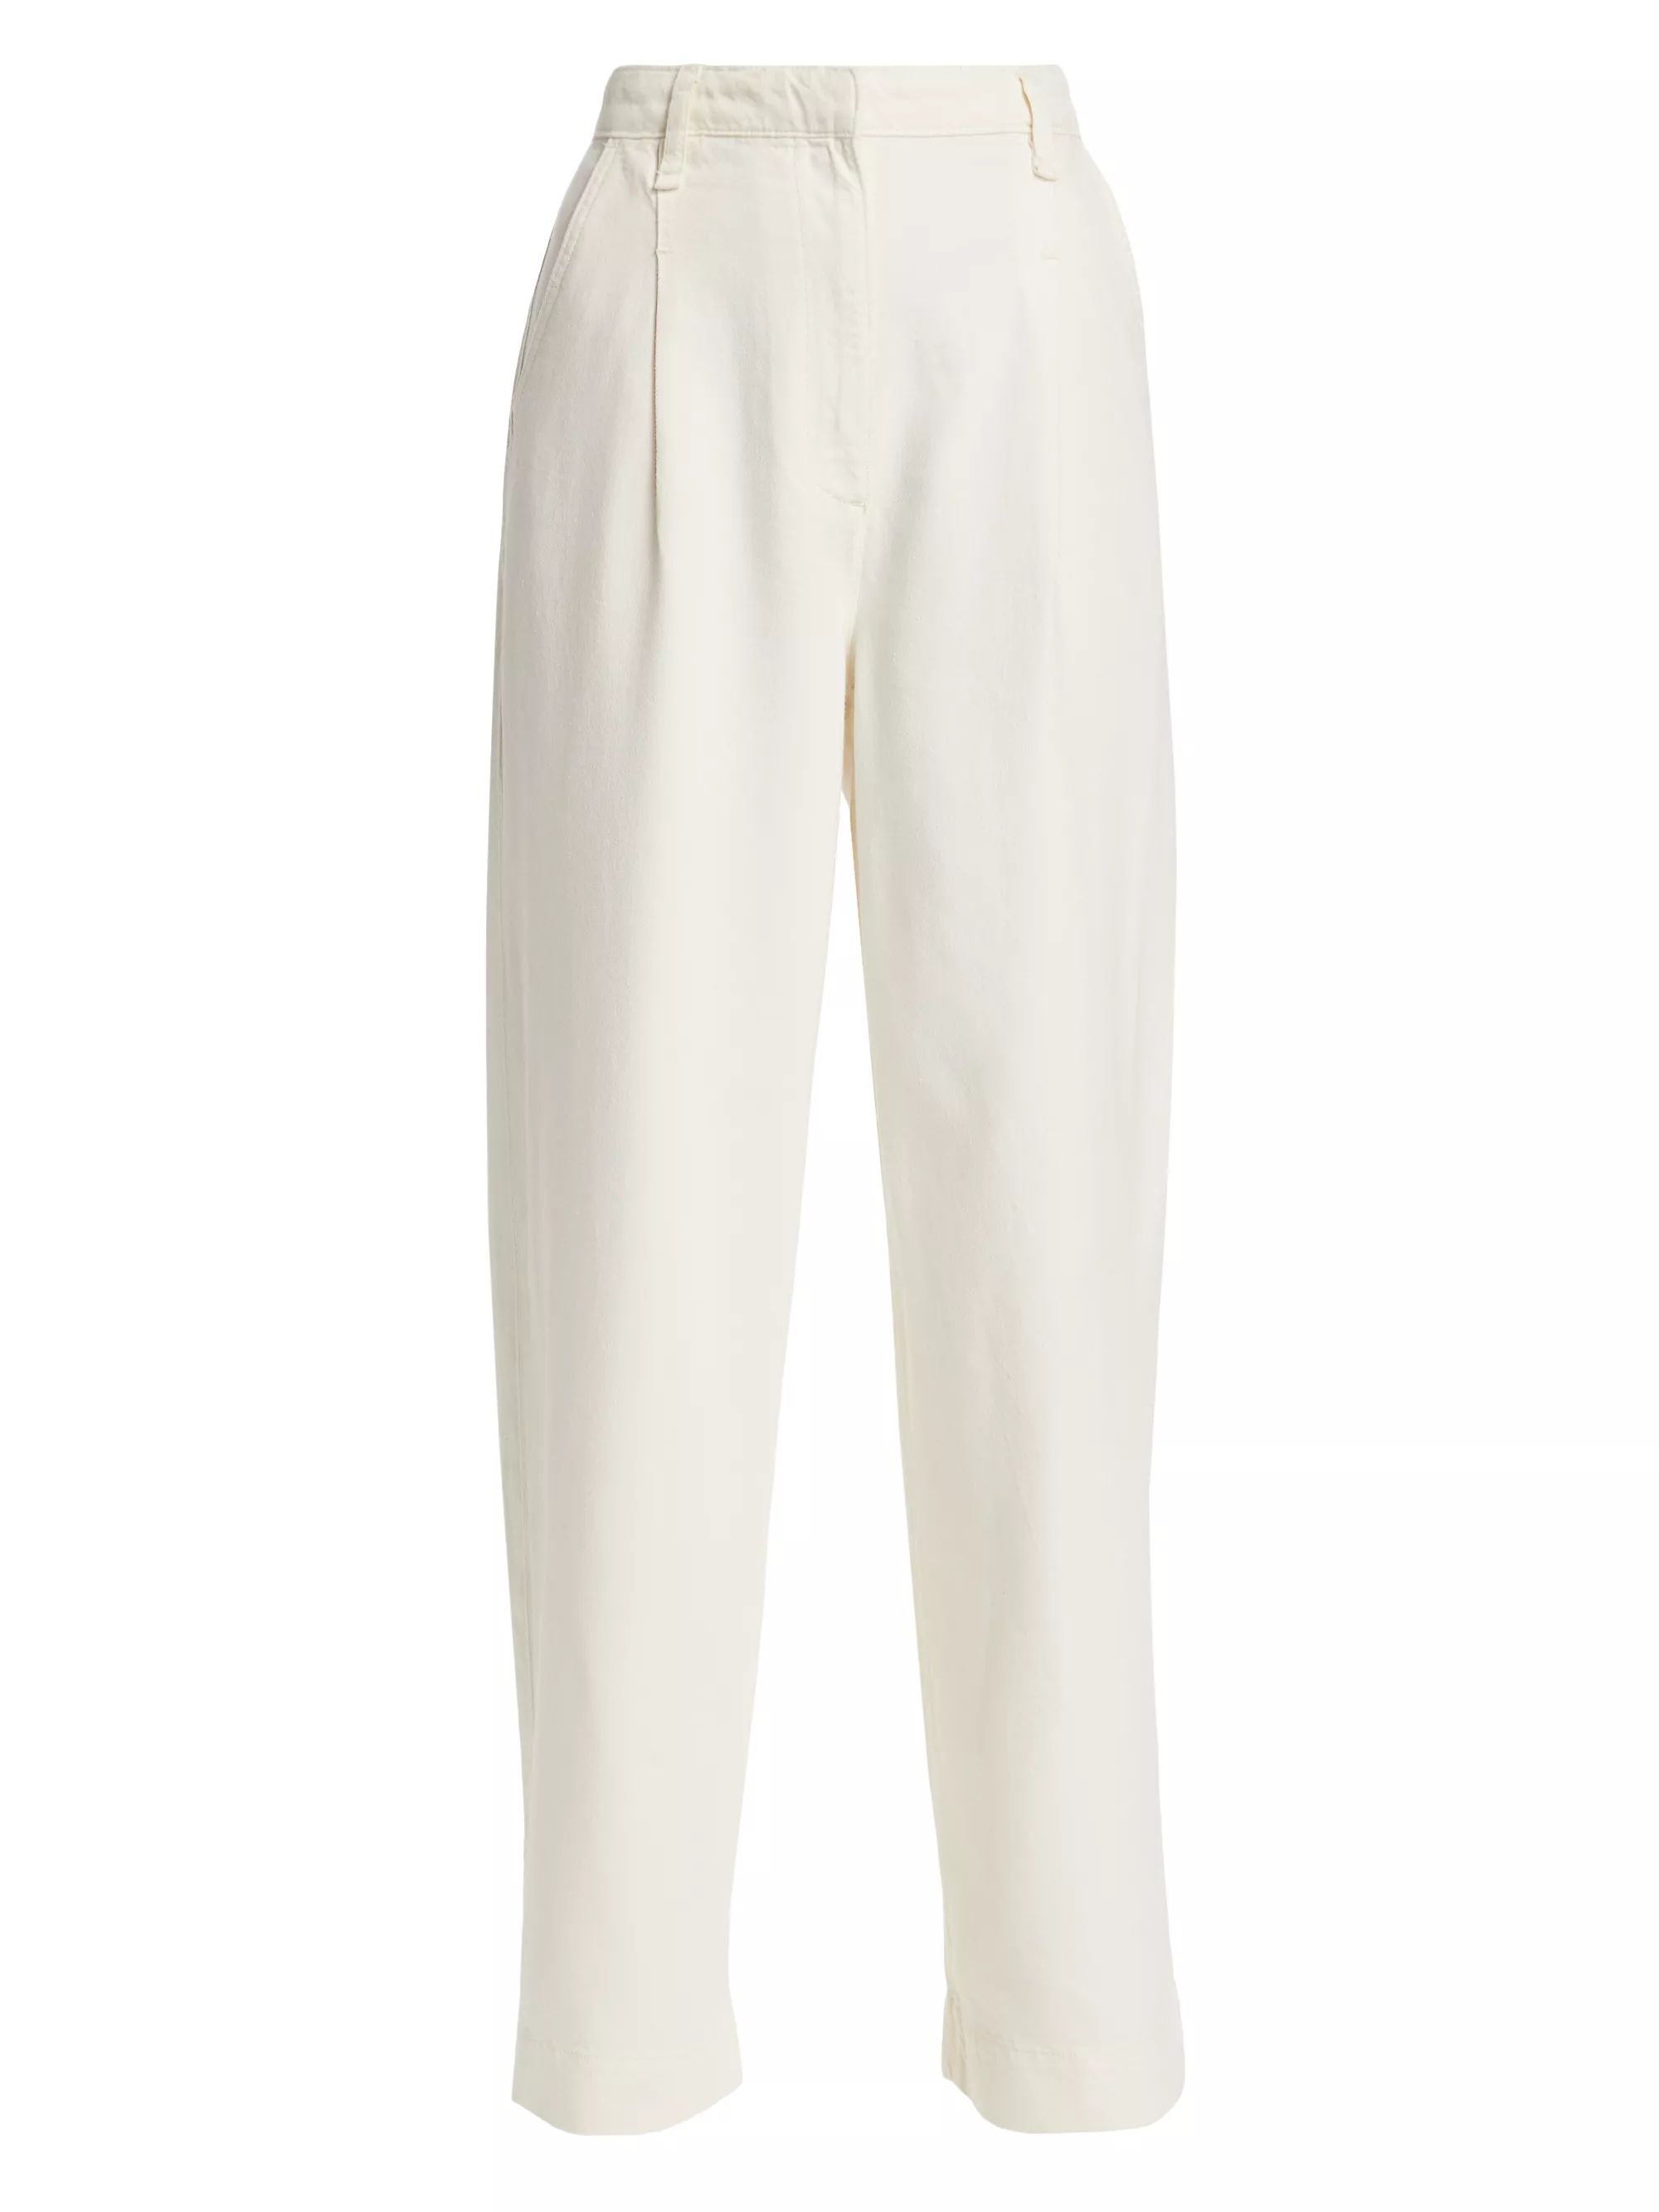 Featherweight Abigale Pleat Pants | Saks Fifth Avenue